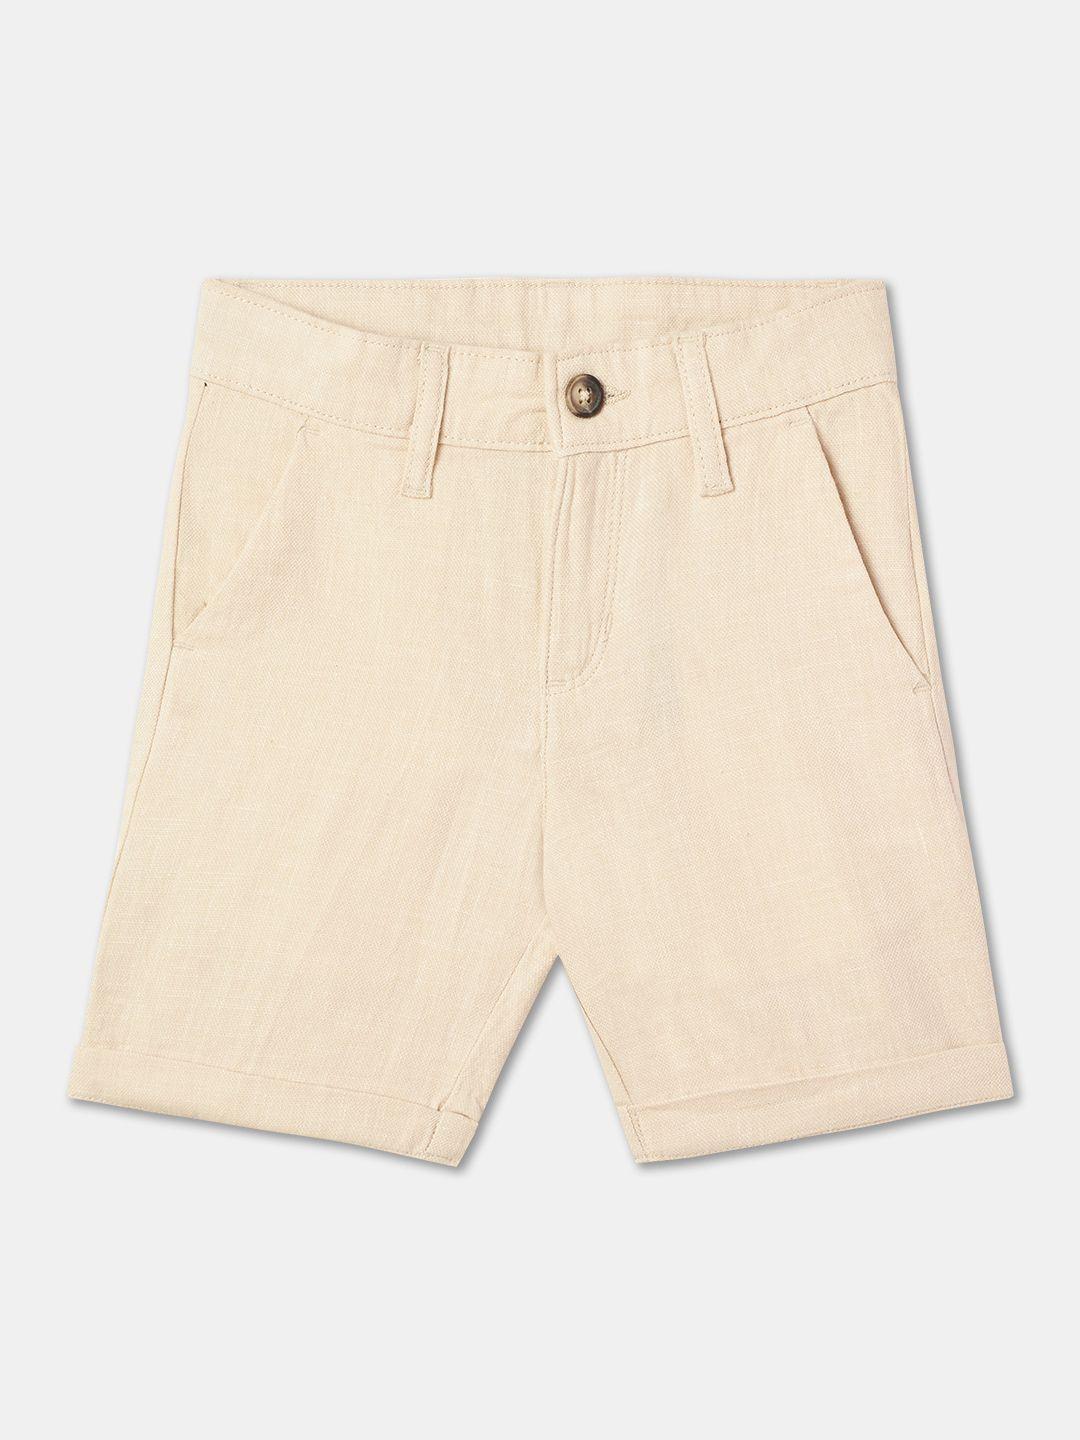 r&b boys mid-rise above knee length woven cotton shorts